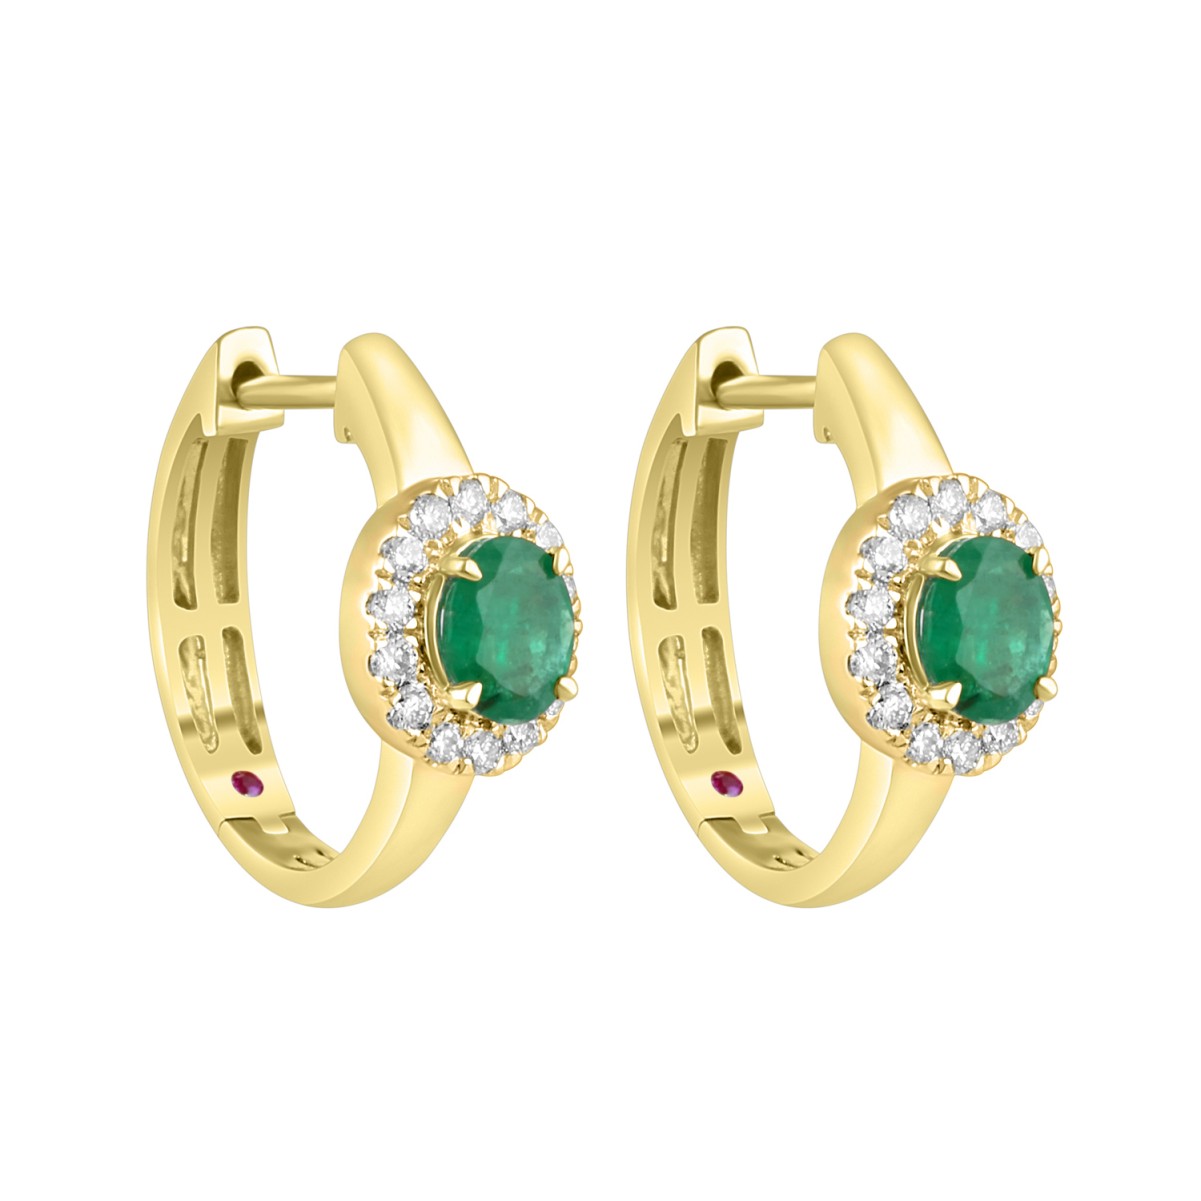 14K YELLOW GOLD 1 1/4CT ROUND/OVAL DIAMOND LADIES HOOPS EARRINGS(COLOR STONE OVAL GREEN EMERALD DIAMOND 1/2CT)